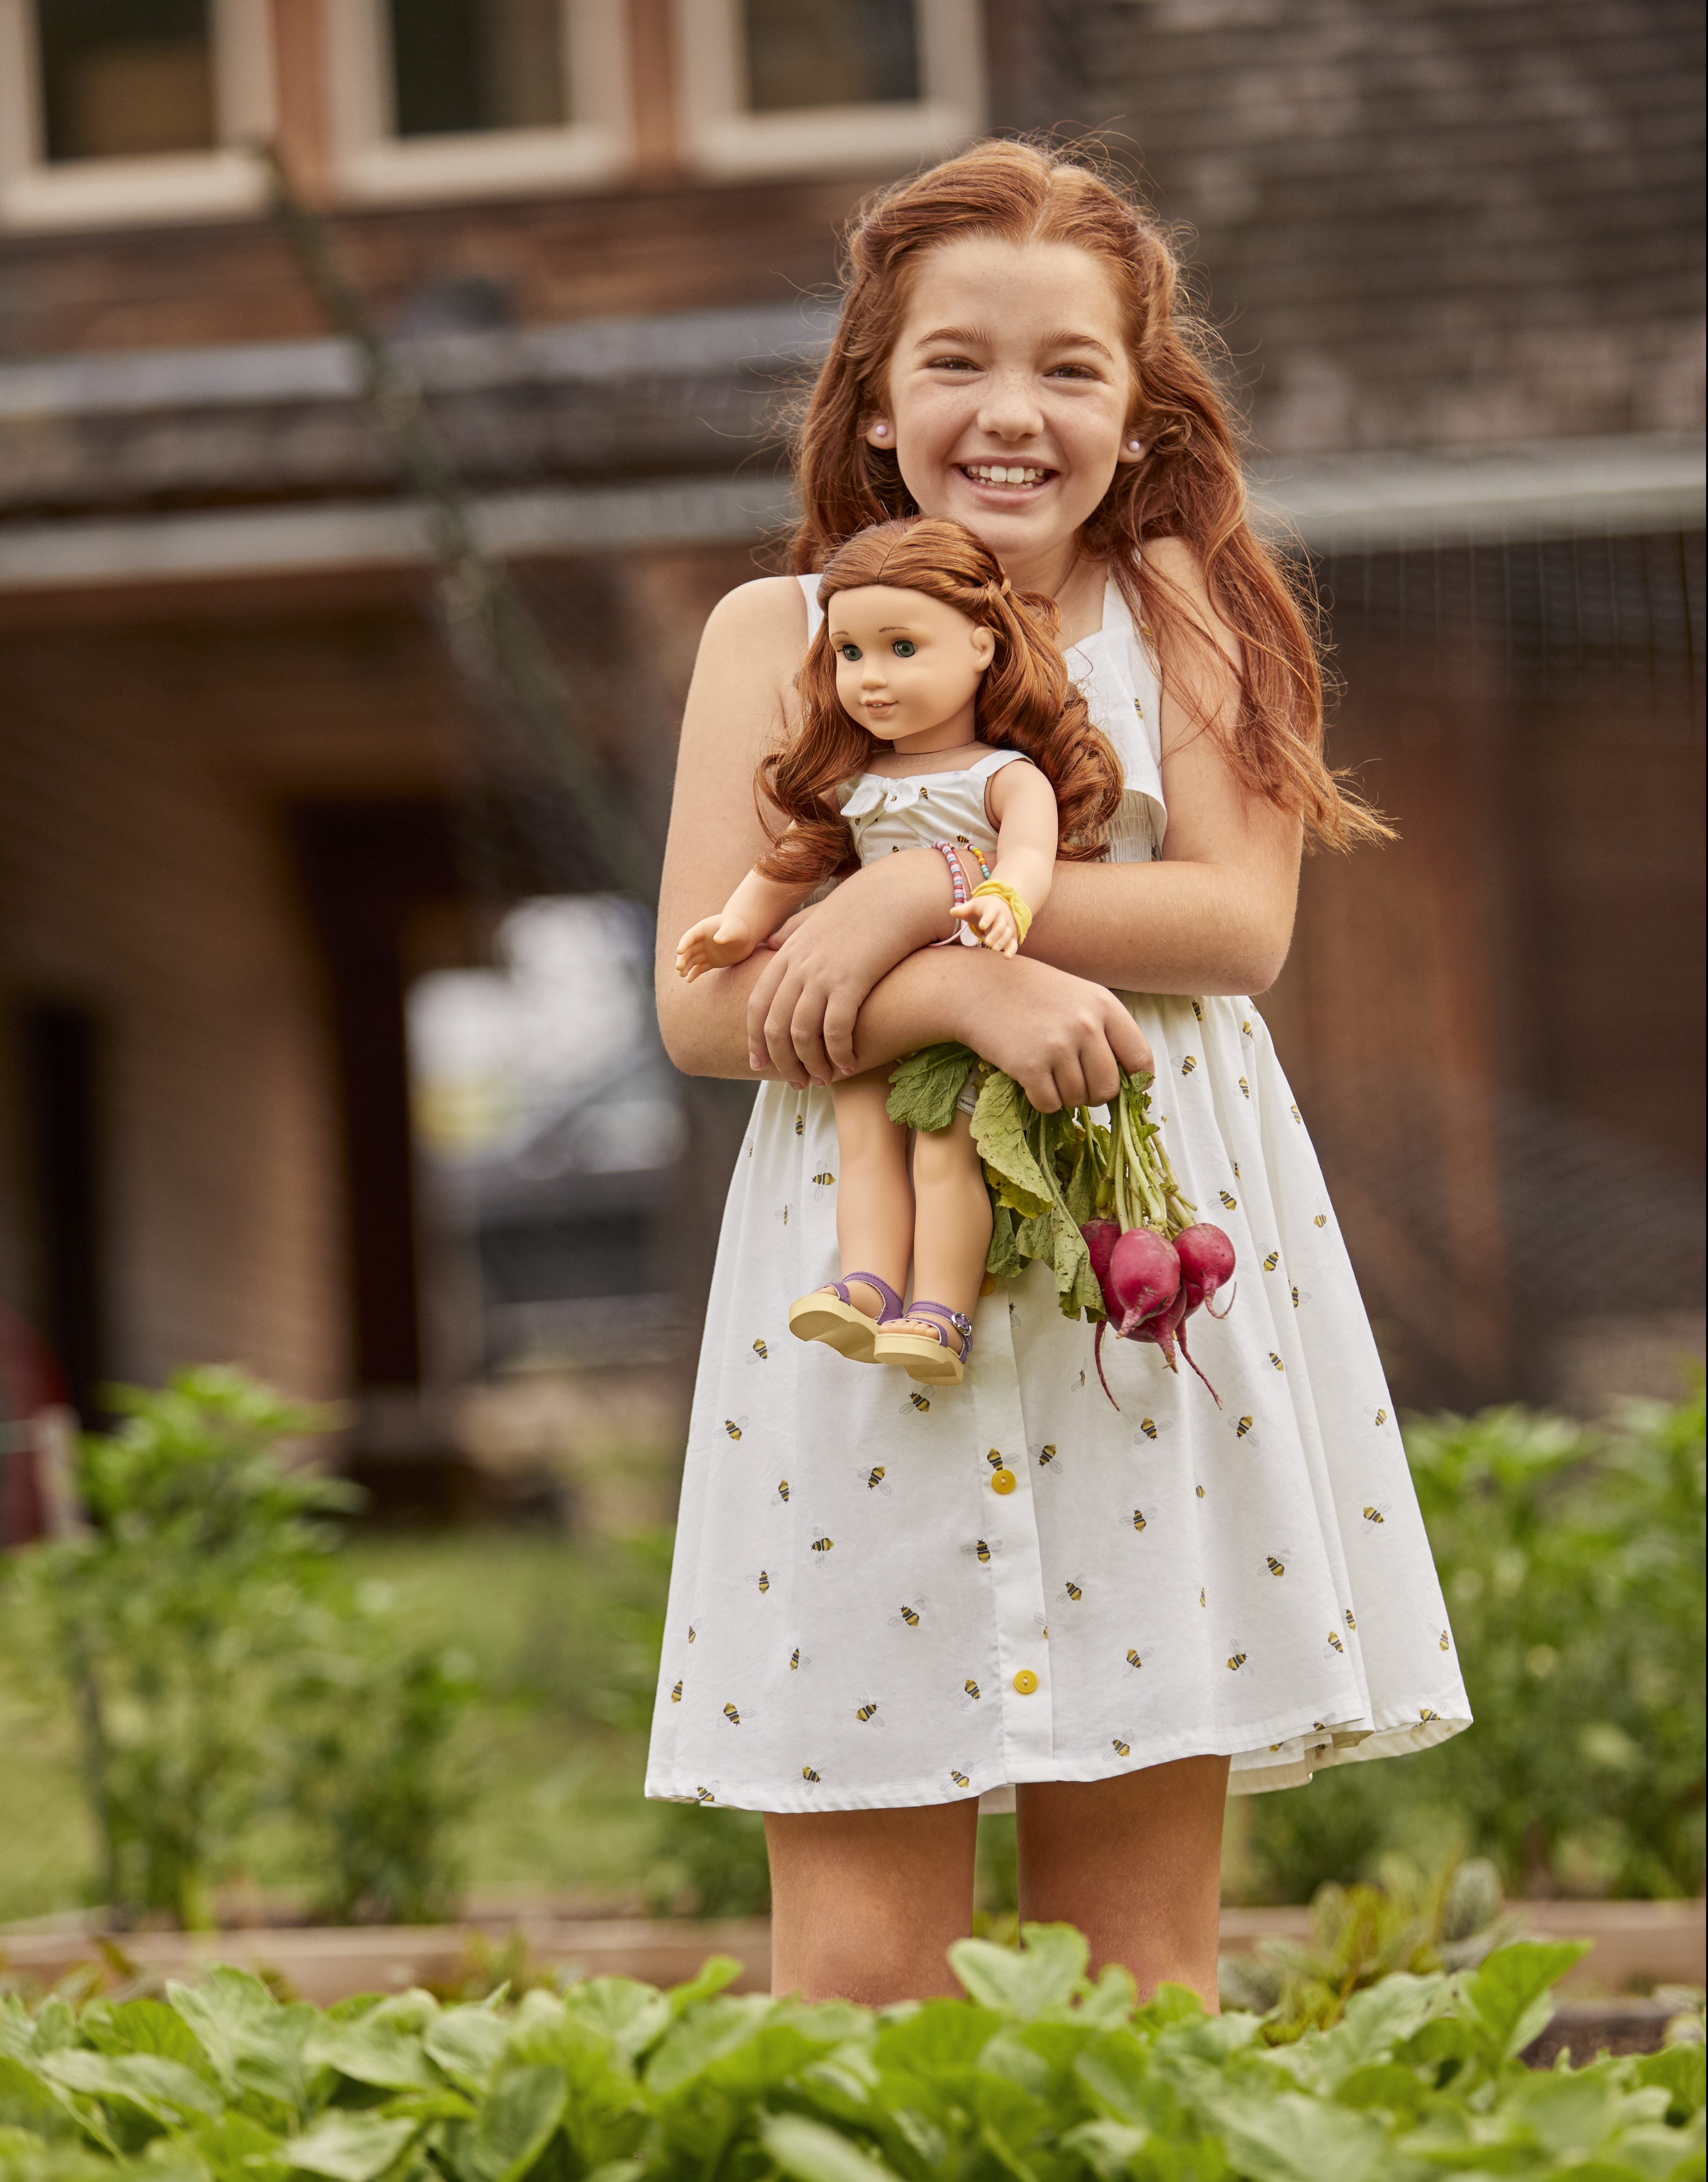 American Girl Doll Blaire